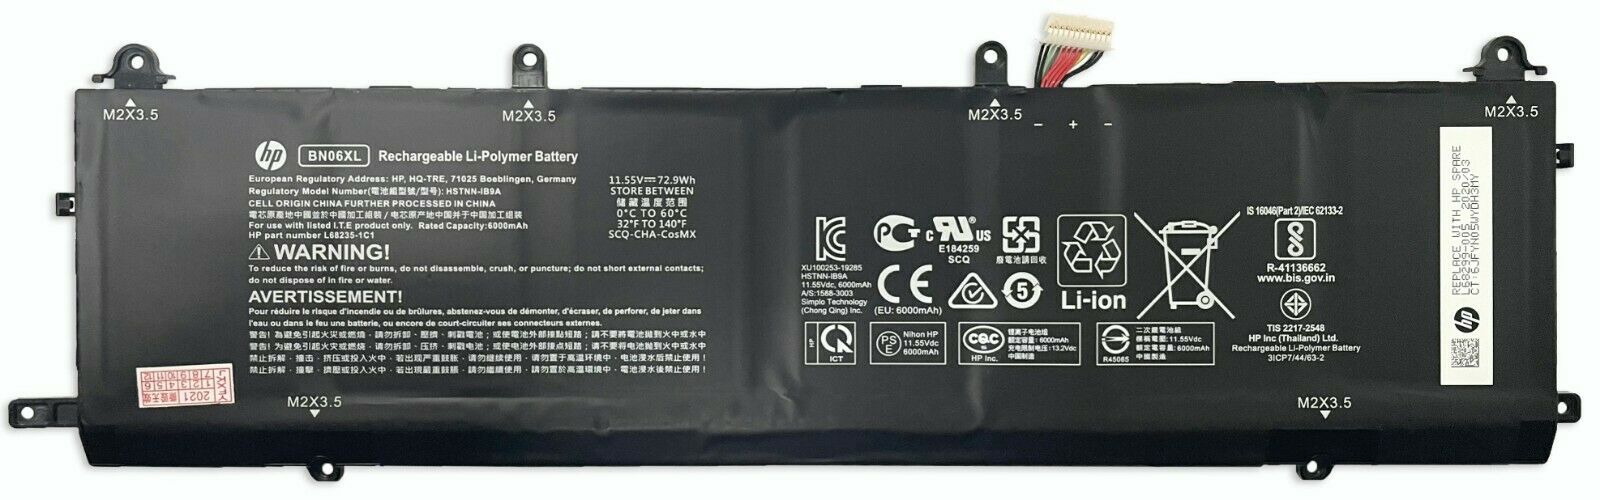 HP Spectre 15-eb0000 x360 Battery 6-cell 72.9Wh